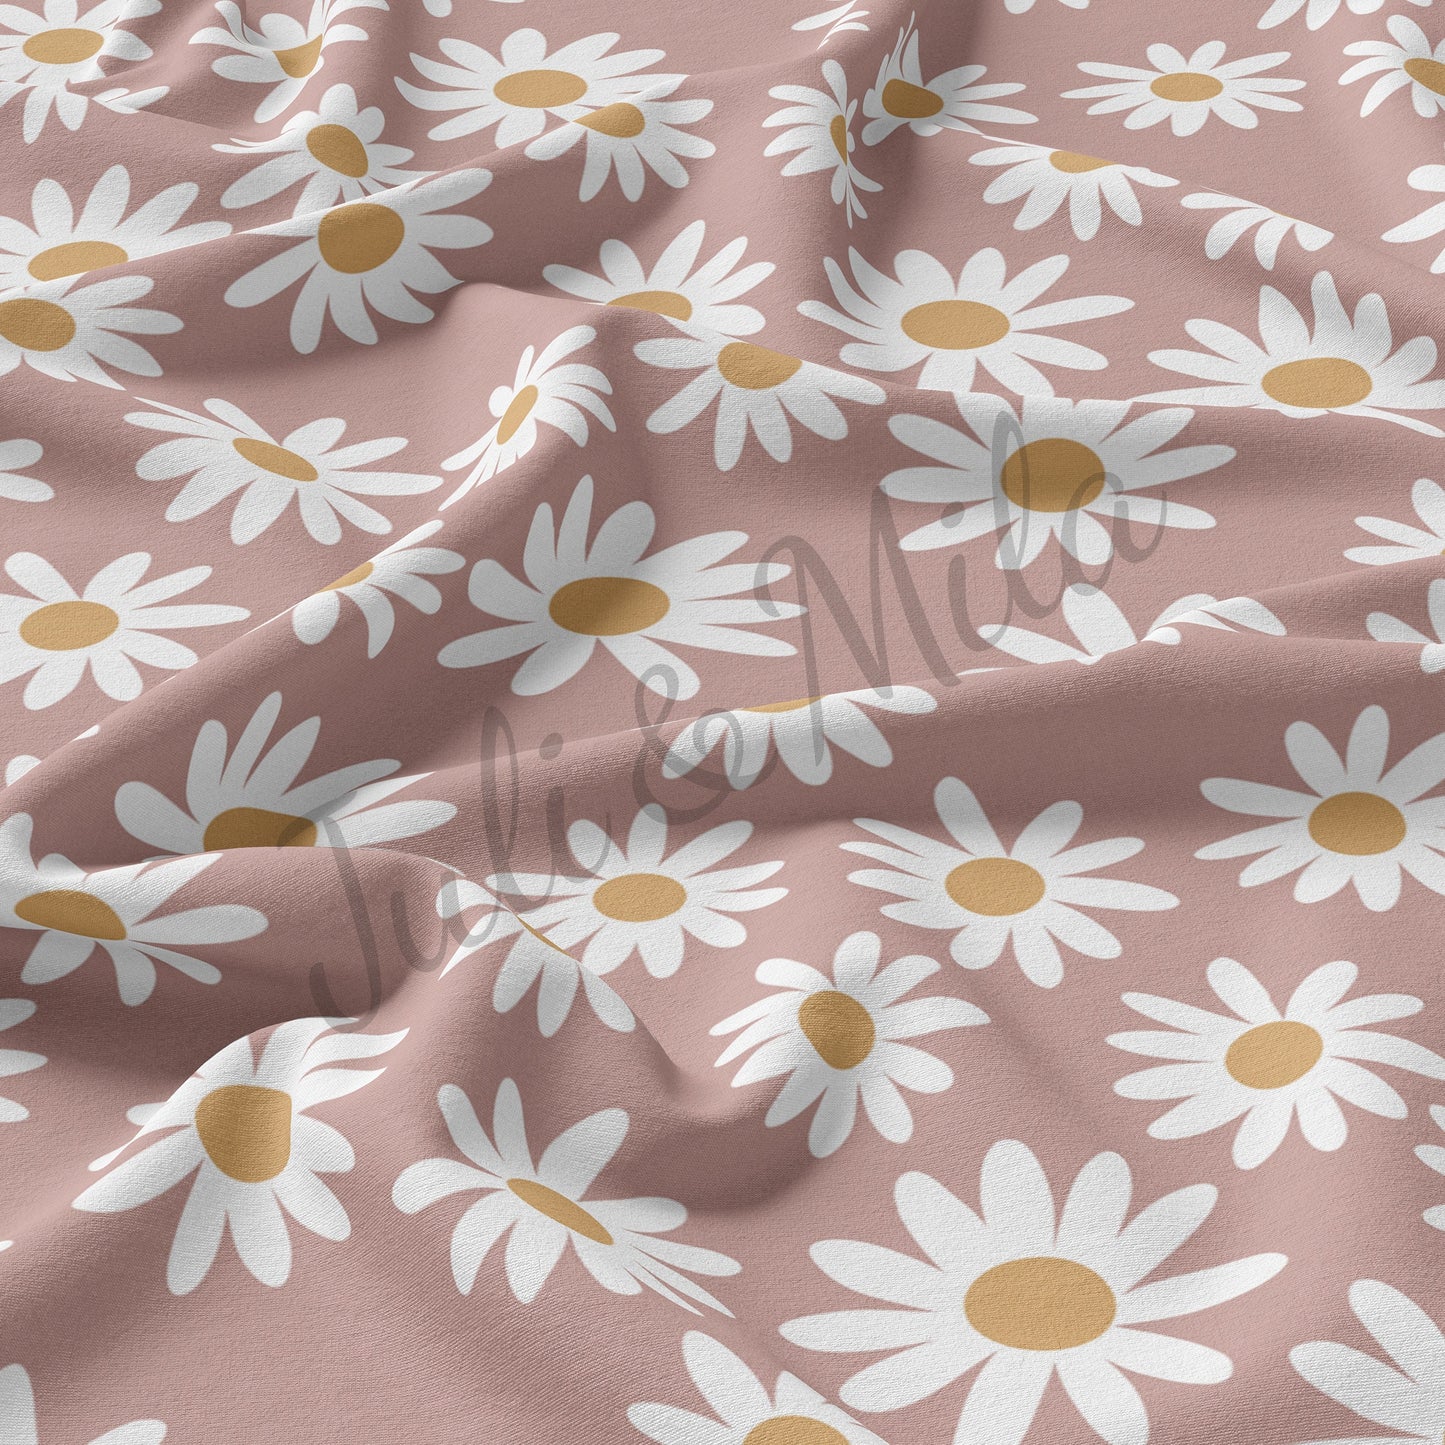 DBP Fabric Double Brushed Polyester Fabric Floral54